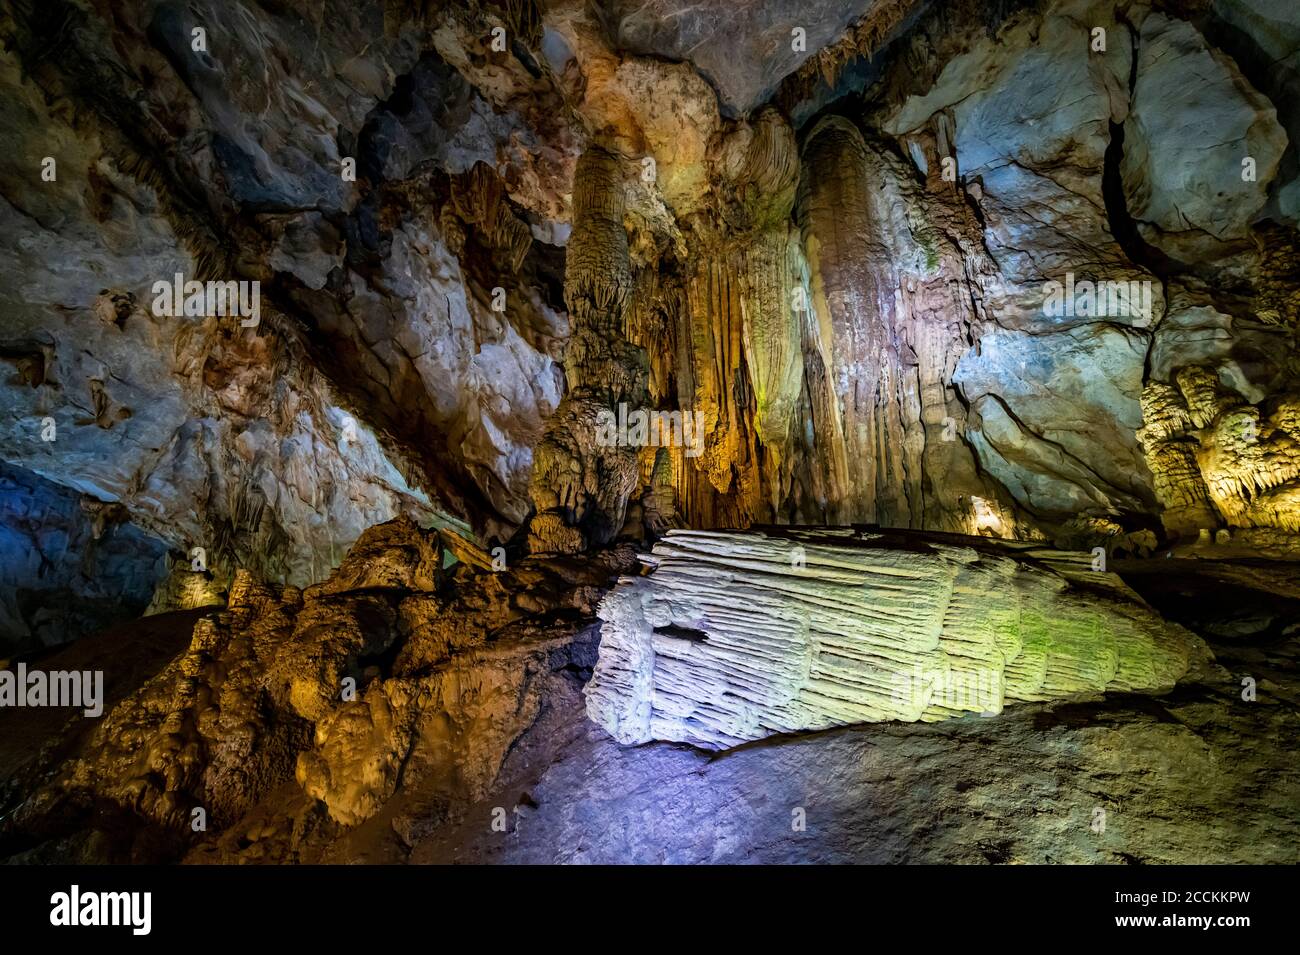 Vietnam, Quang Binh Province, Rock formations inside Paradise Cave Stock Photo